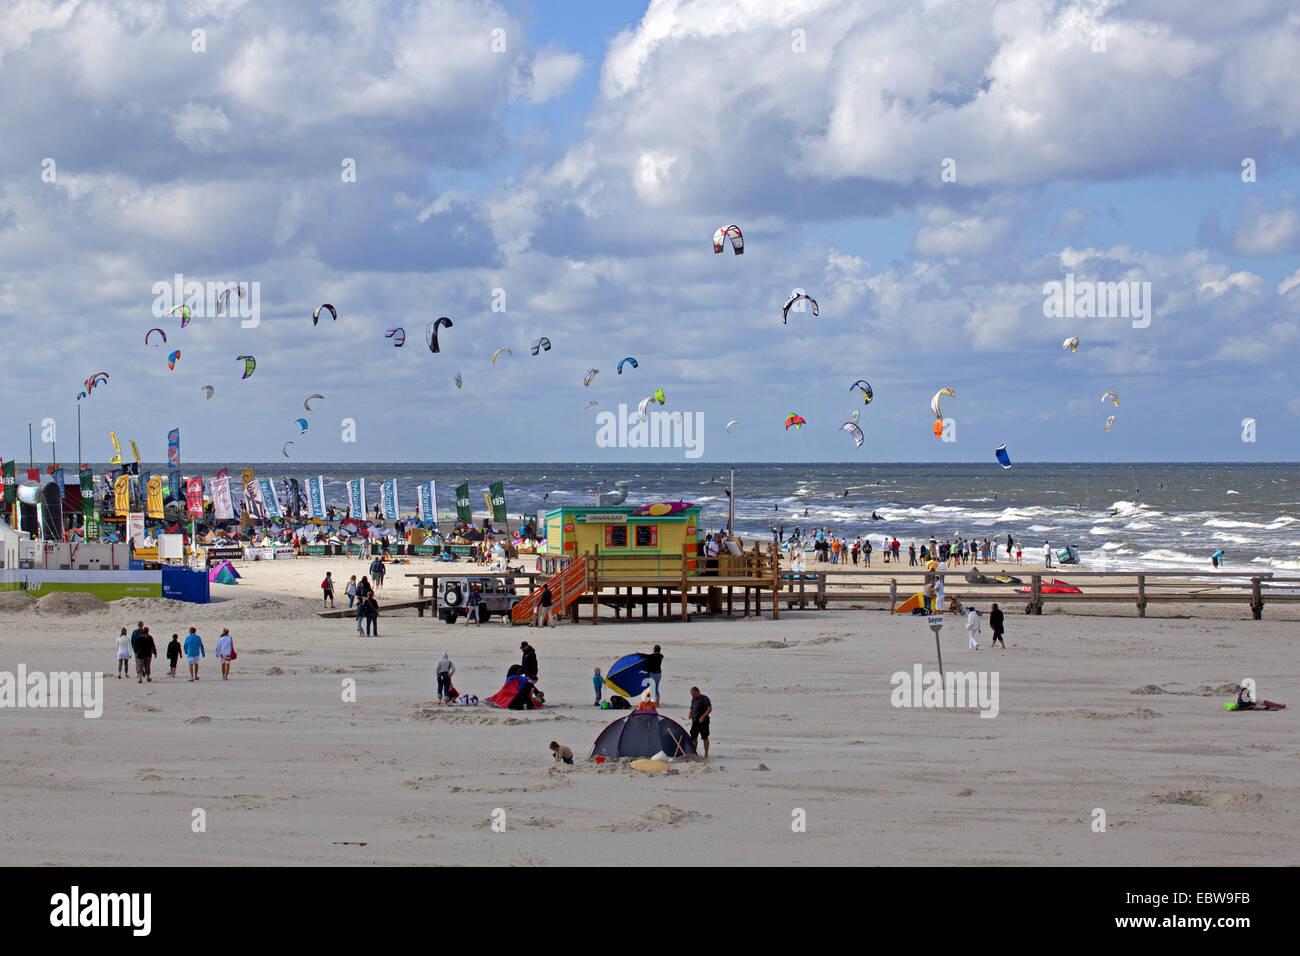 Kitesurf World Cup at the beach of St. Peter Ording, Germany, Schleswig-Holstein, St. Peter Ording Stock Photo